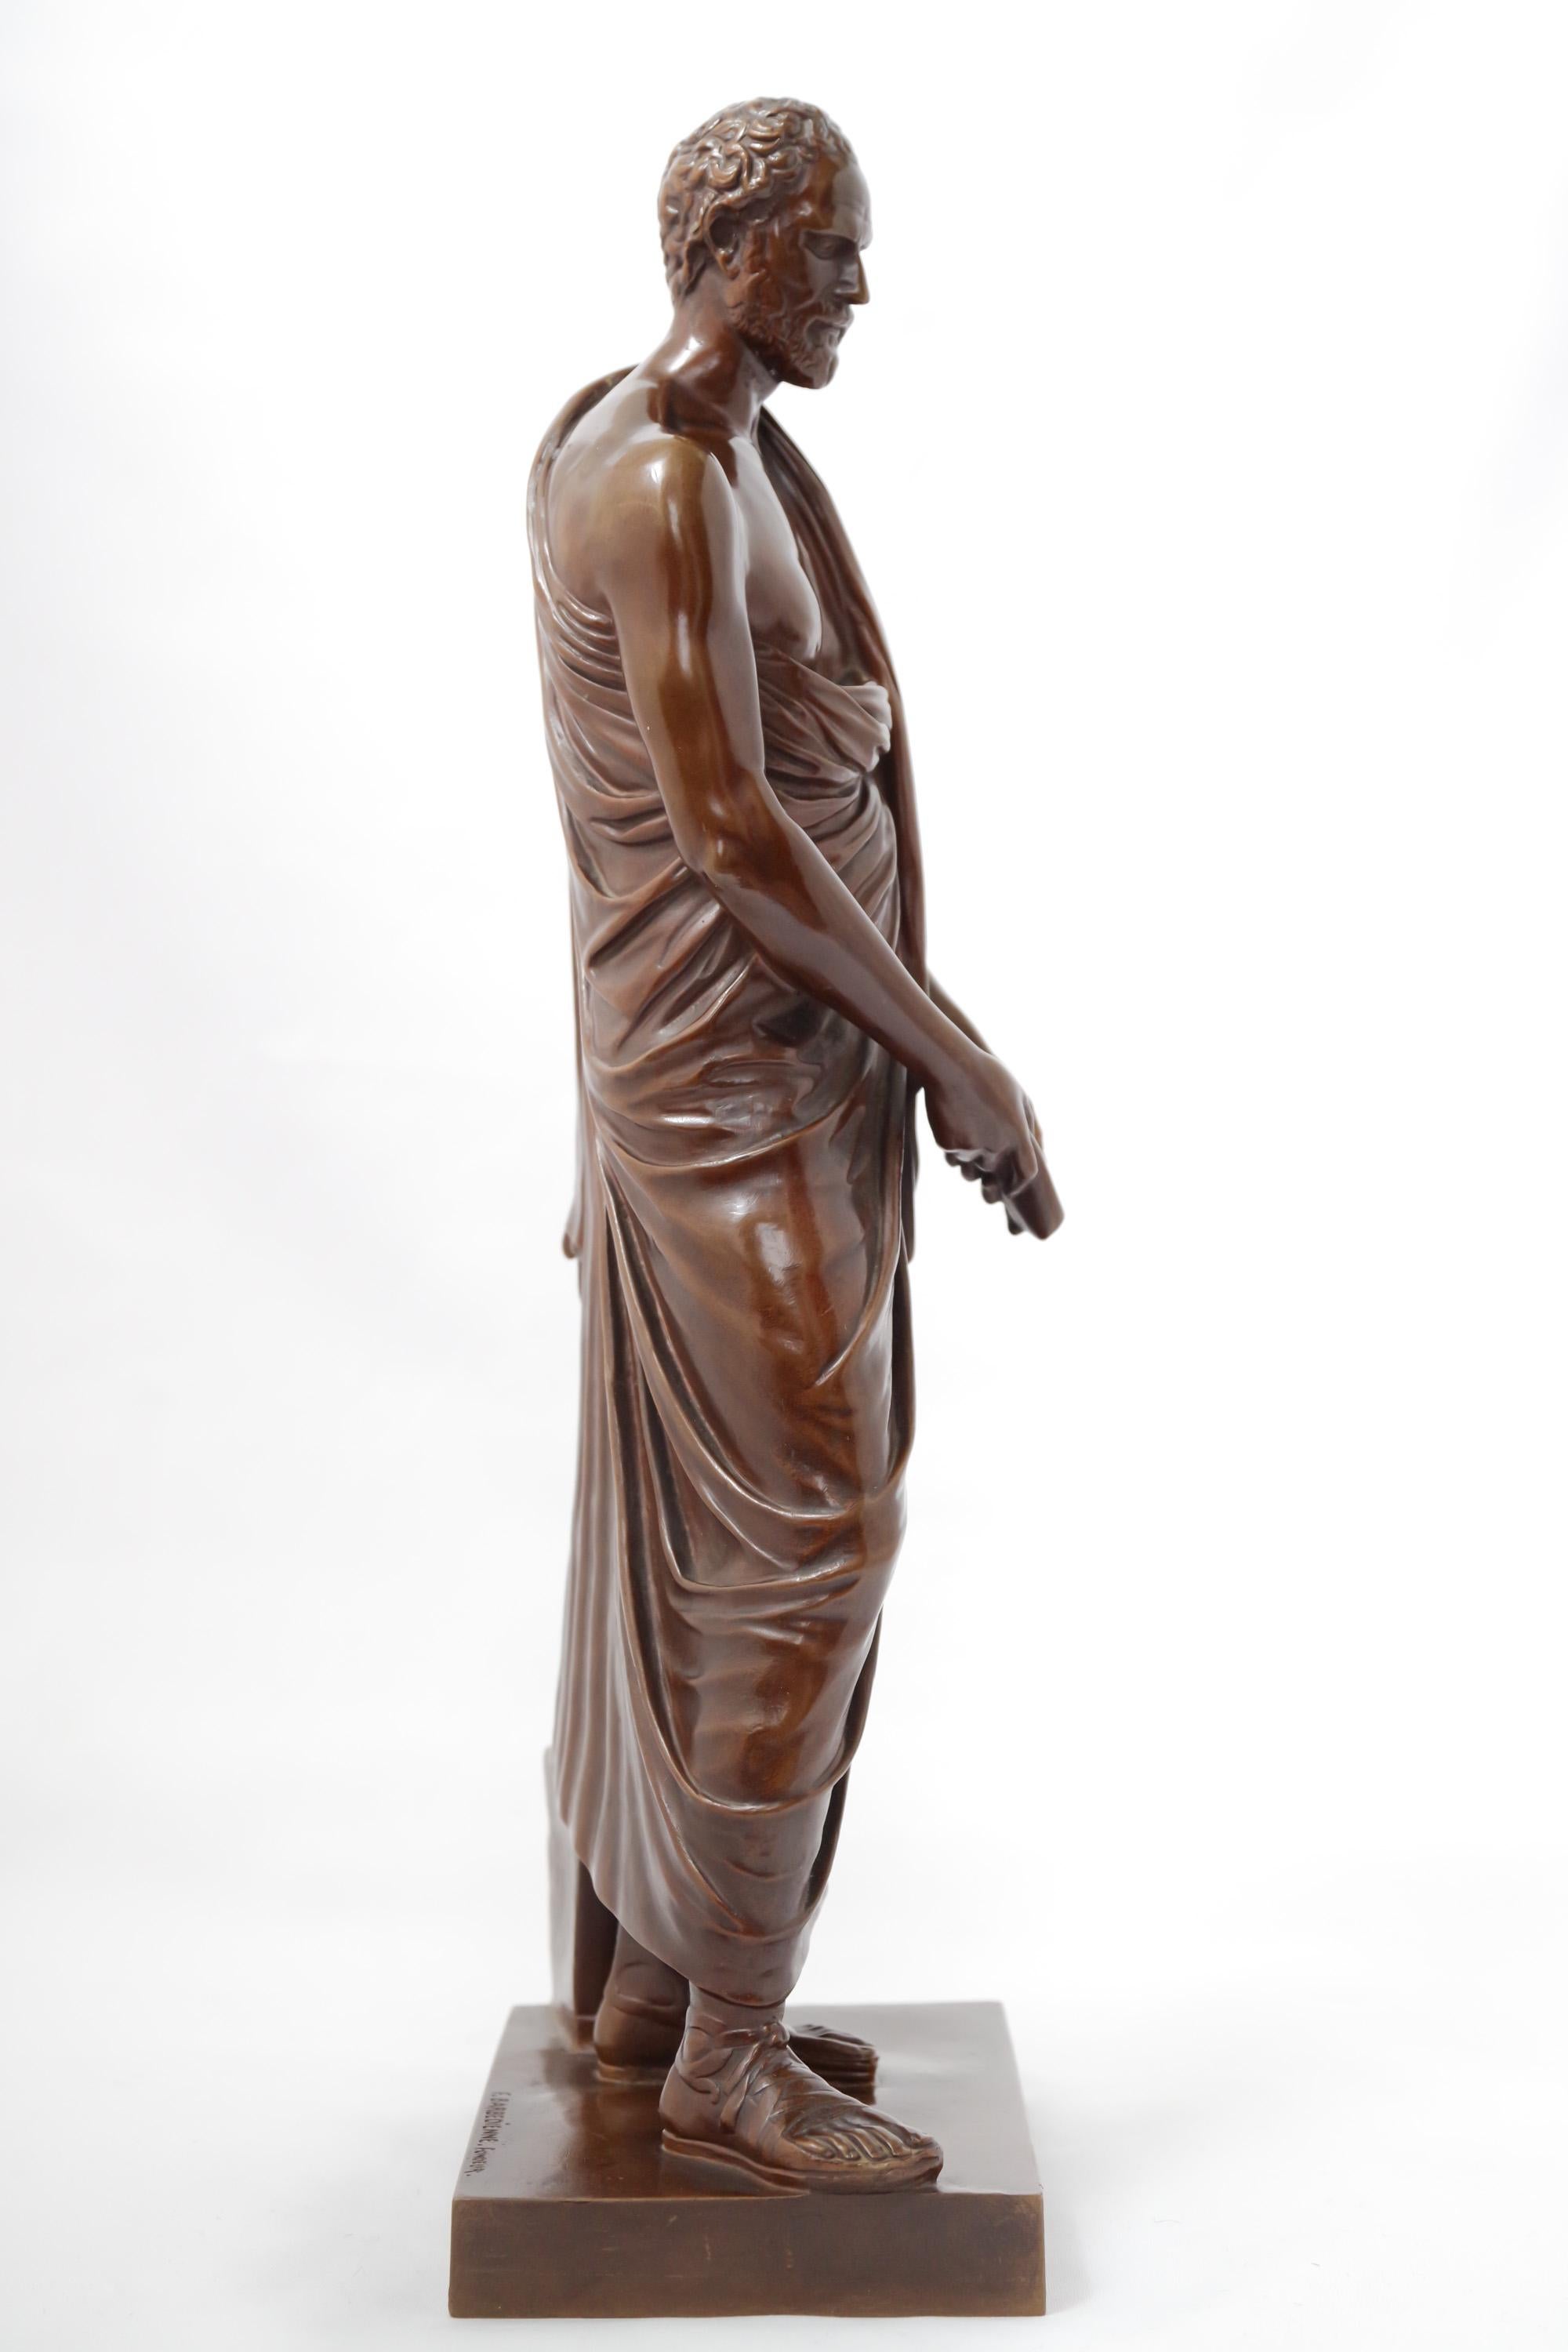 A bronze figure representing Demosthenes (384-322 BC), a Greek statesman and orator. The sculpture is based on a Roman copy of an original Greek statue. The chocolate-brown patina of the character immediately brings to mind the work the 19th-century